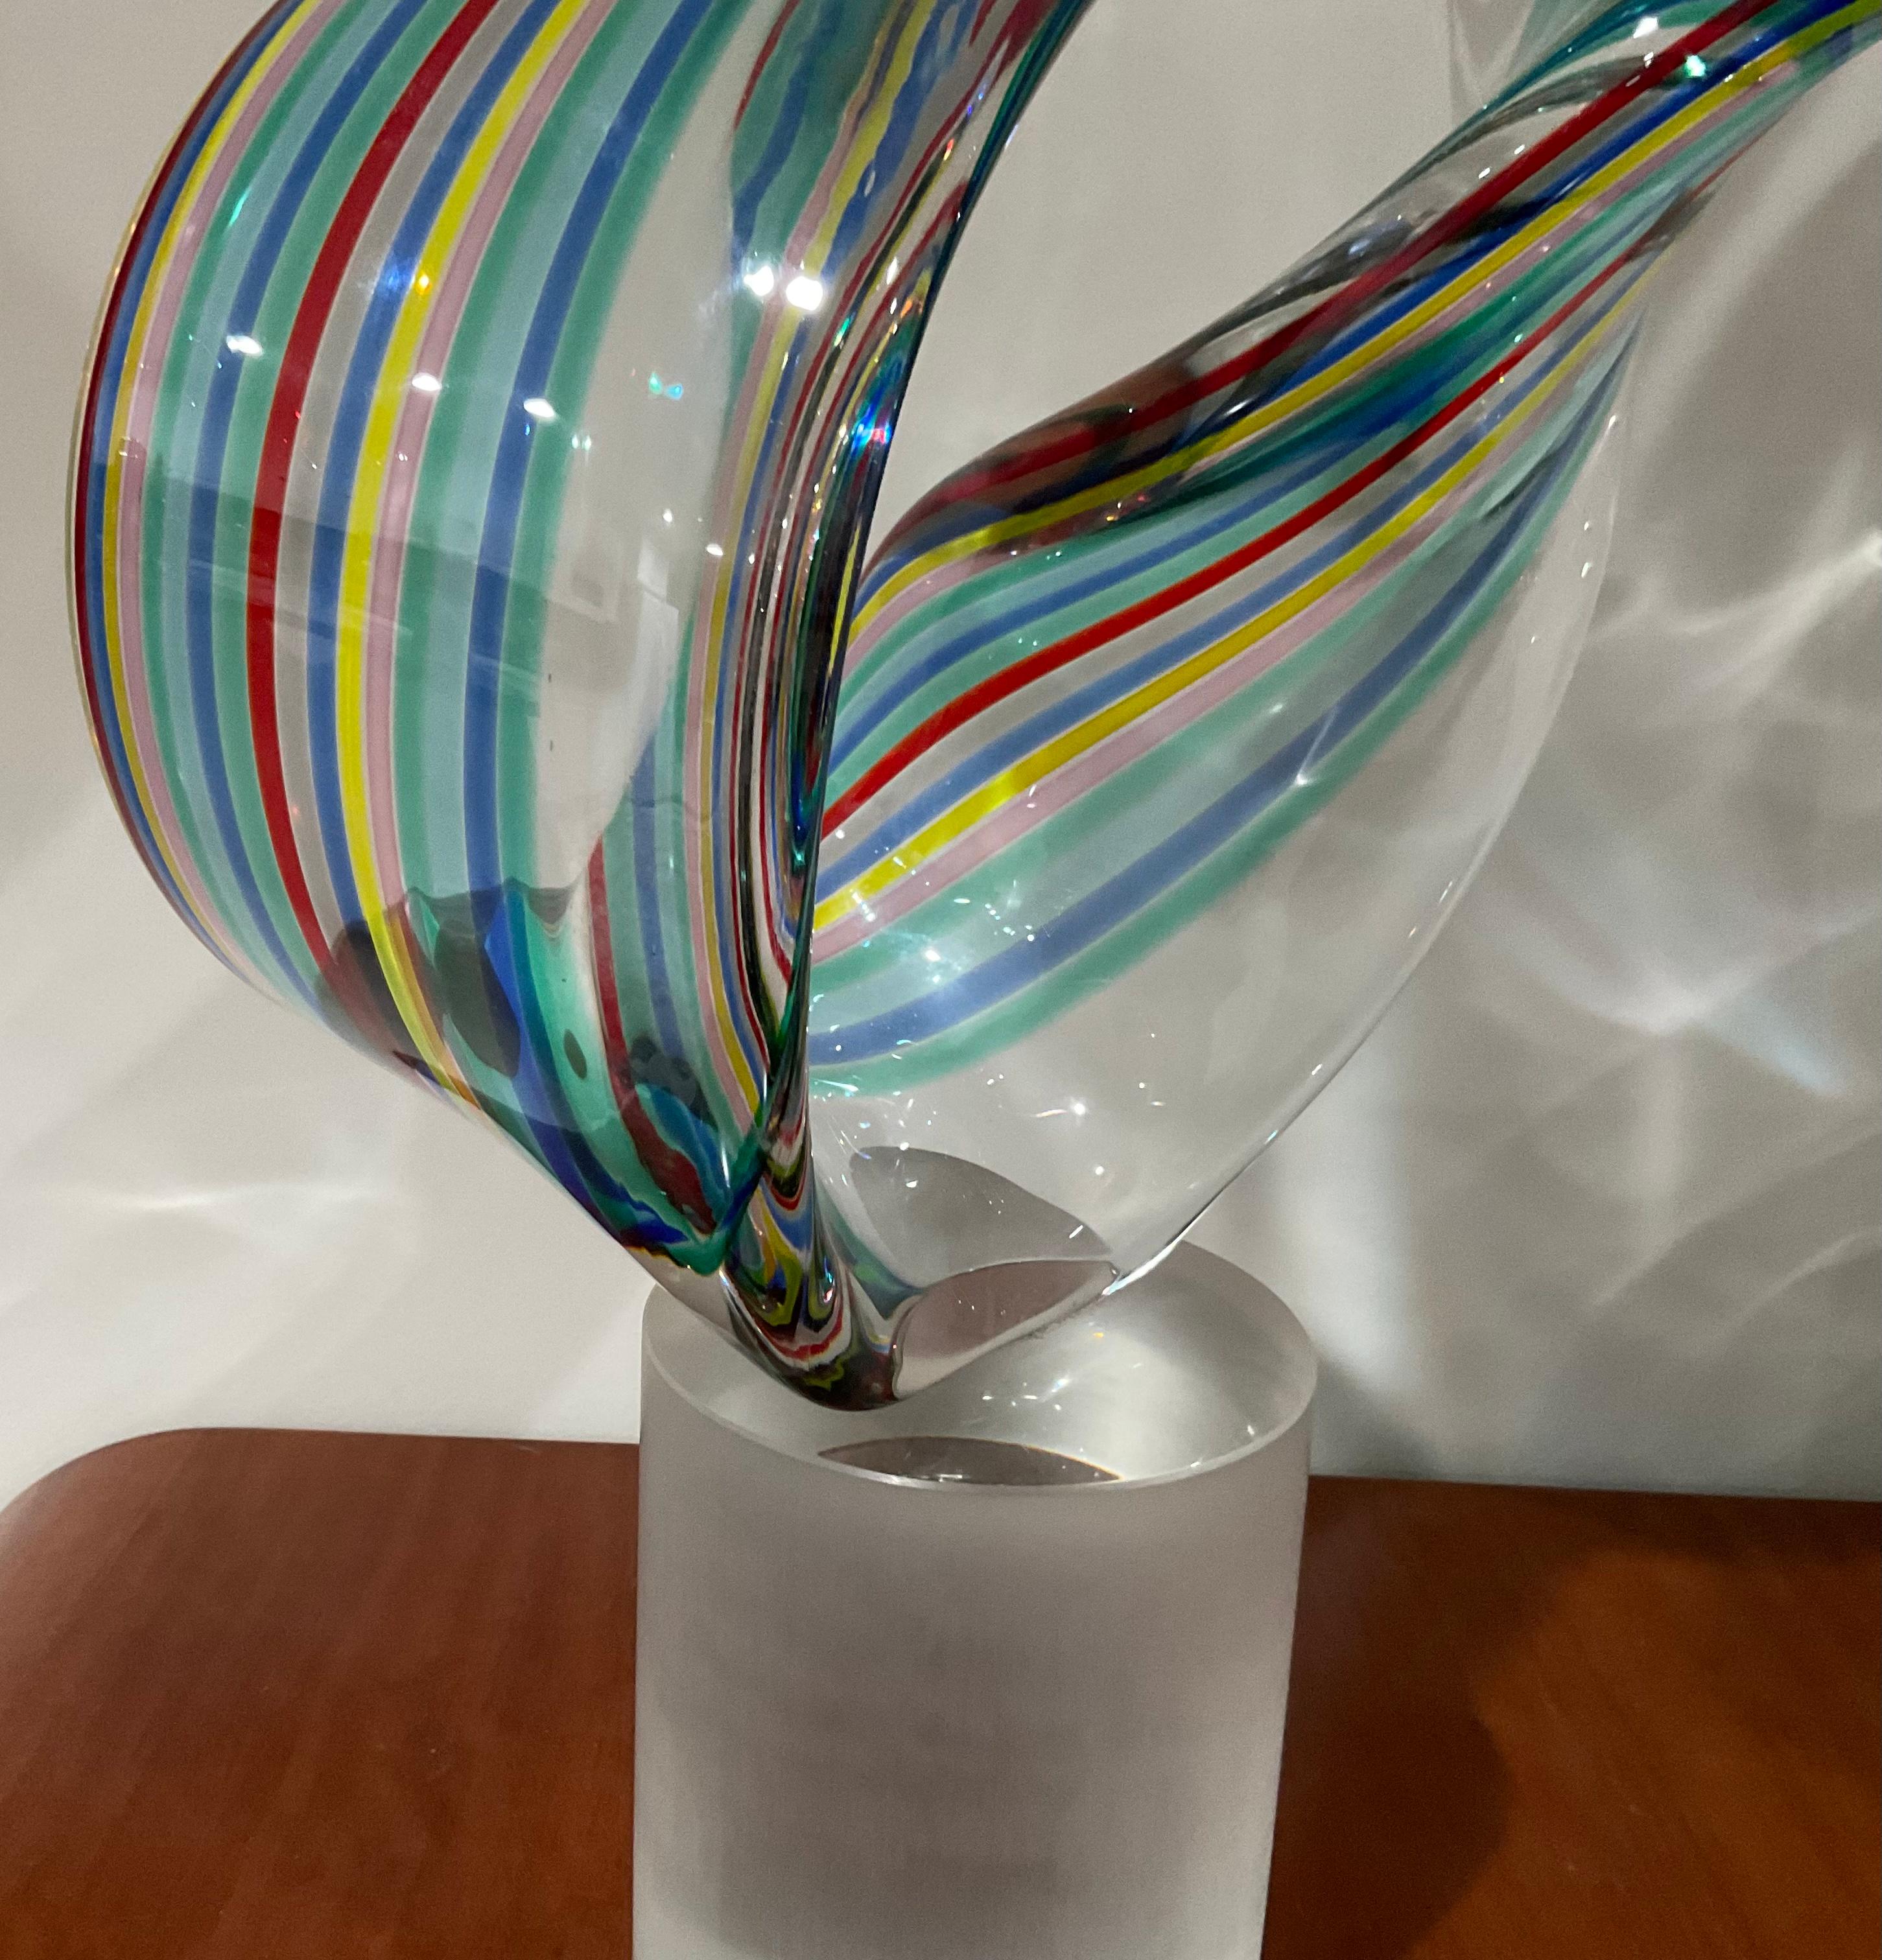 Late 20th Century Livio Seguso Bisazza Rainbow Murano Art Glass Large and Heavy Abstract Sculpture For Sale